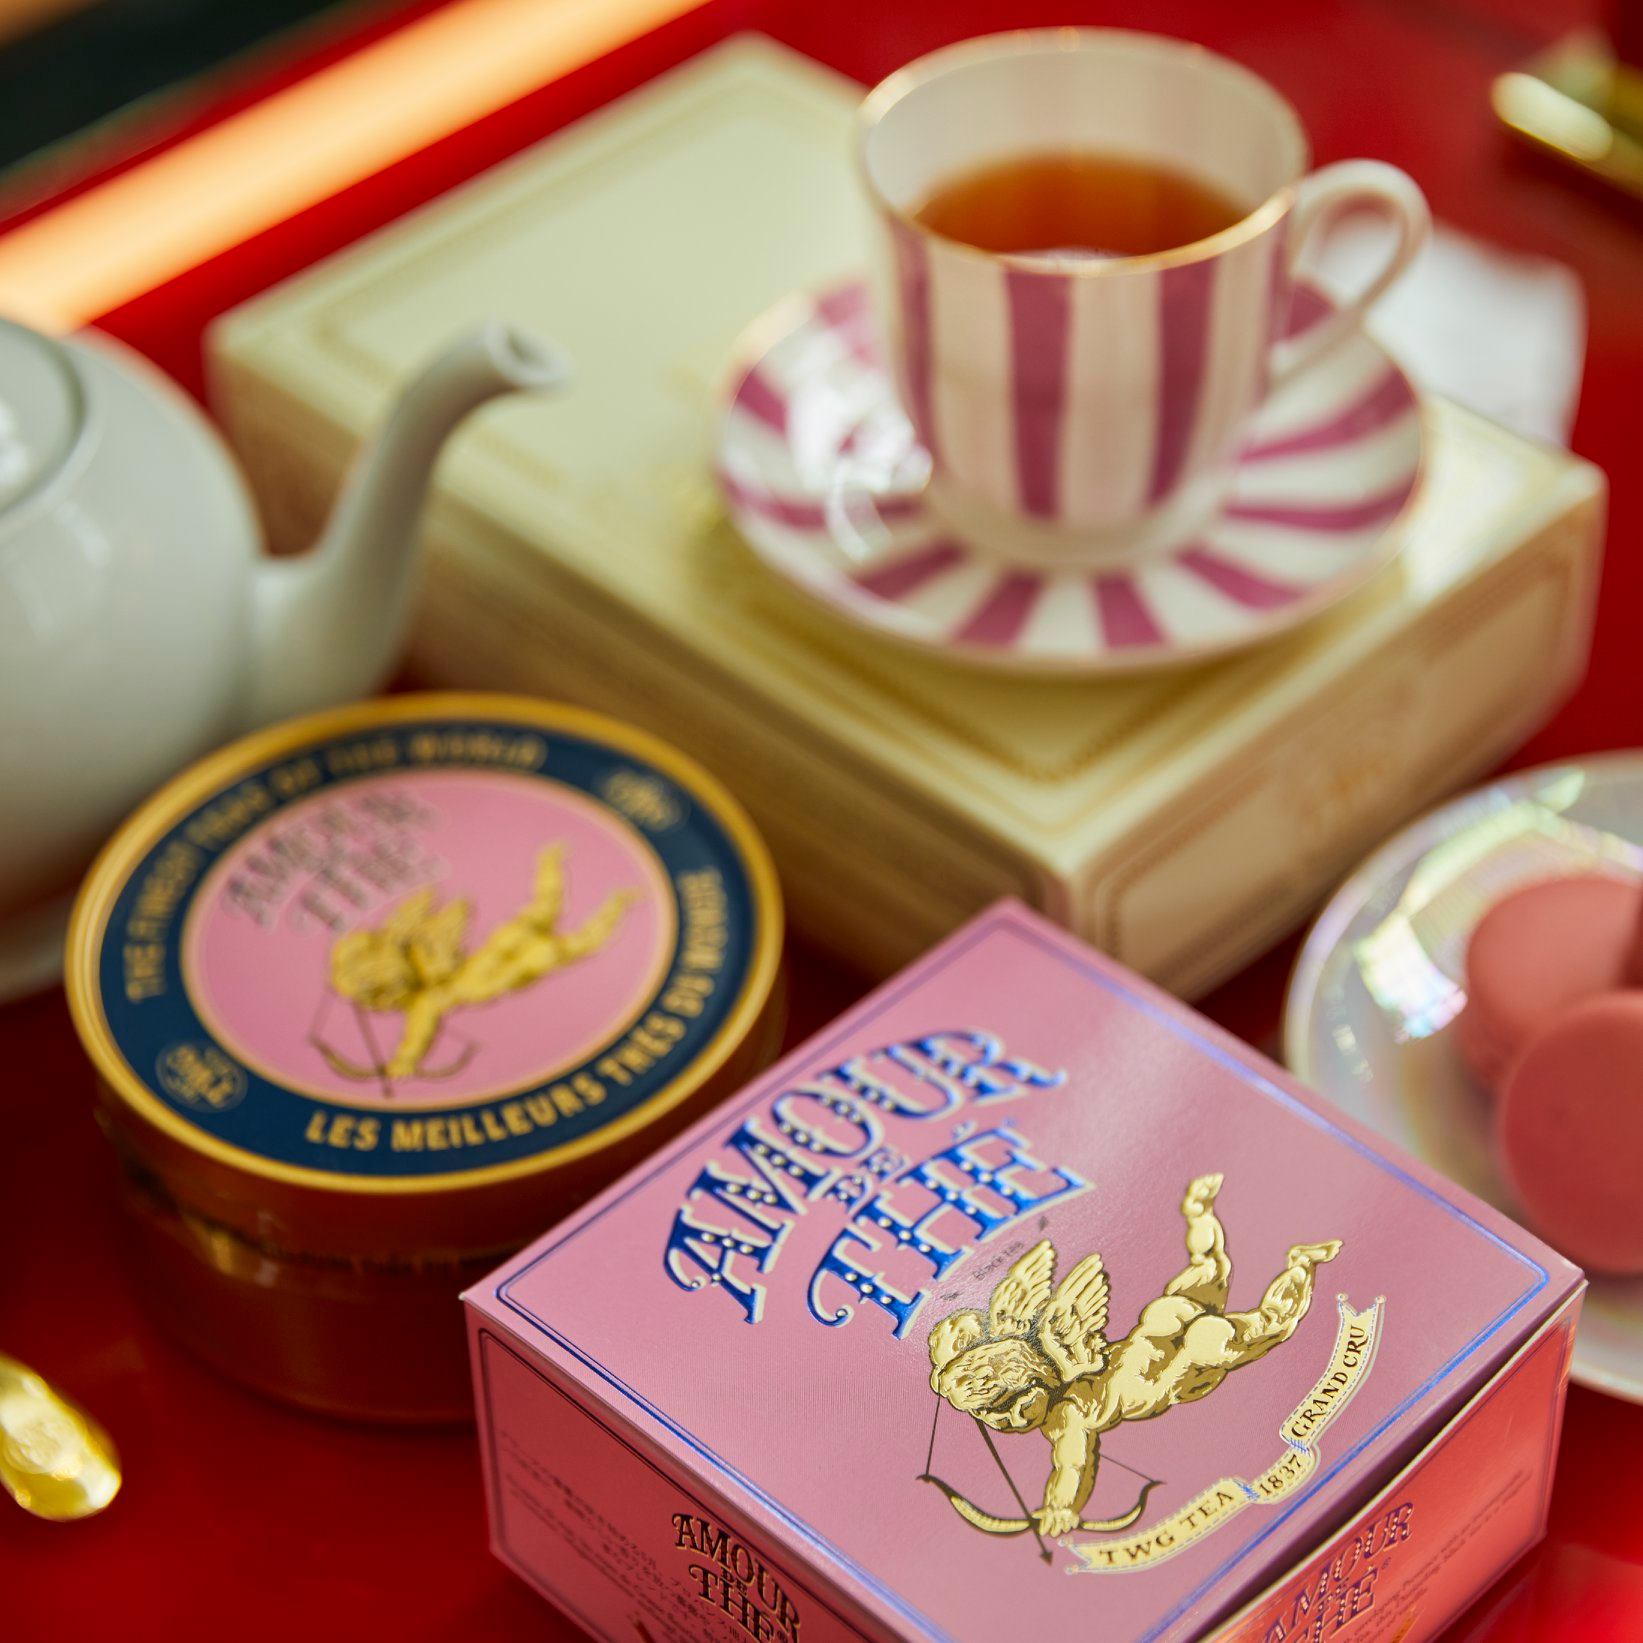 This Valentine's, offer her a cup of Amour de Thé, an exceptional first flush Darjeeling blended with delicate rose blossoms from Grasse... An enchanting potion to awaken desires! Shop now at TWGTea.Com! #TWGTeaOfficial